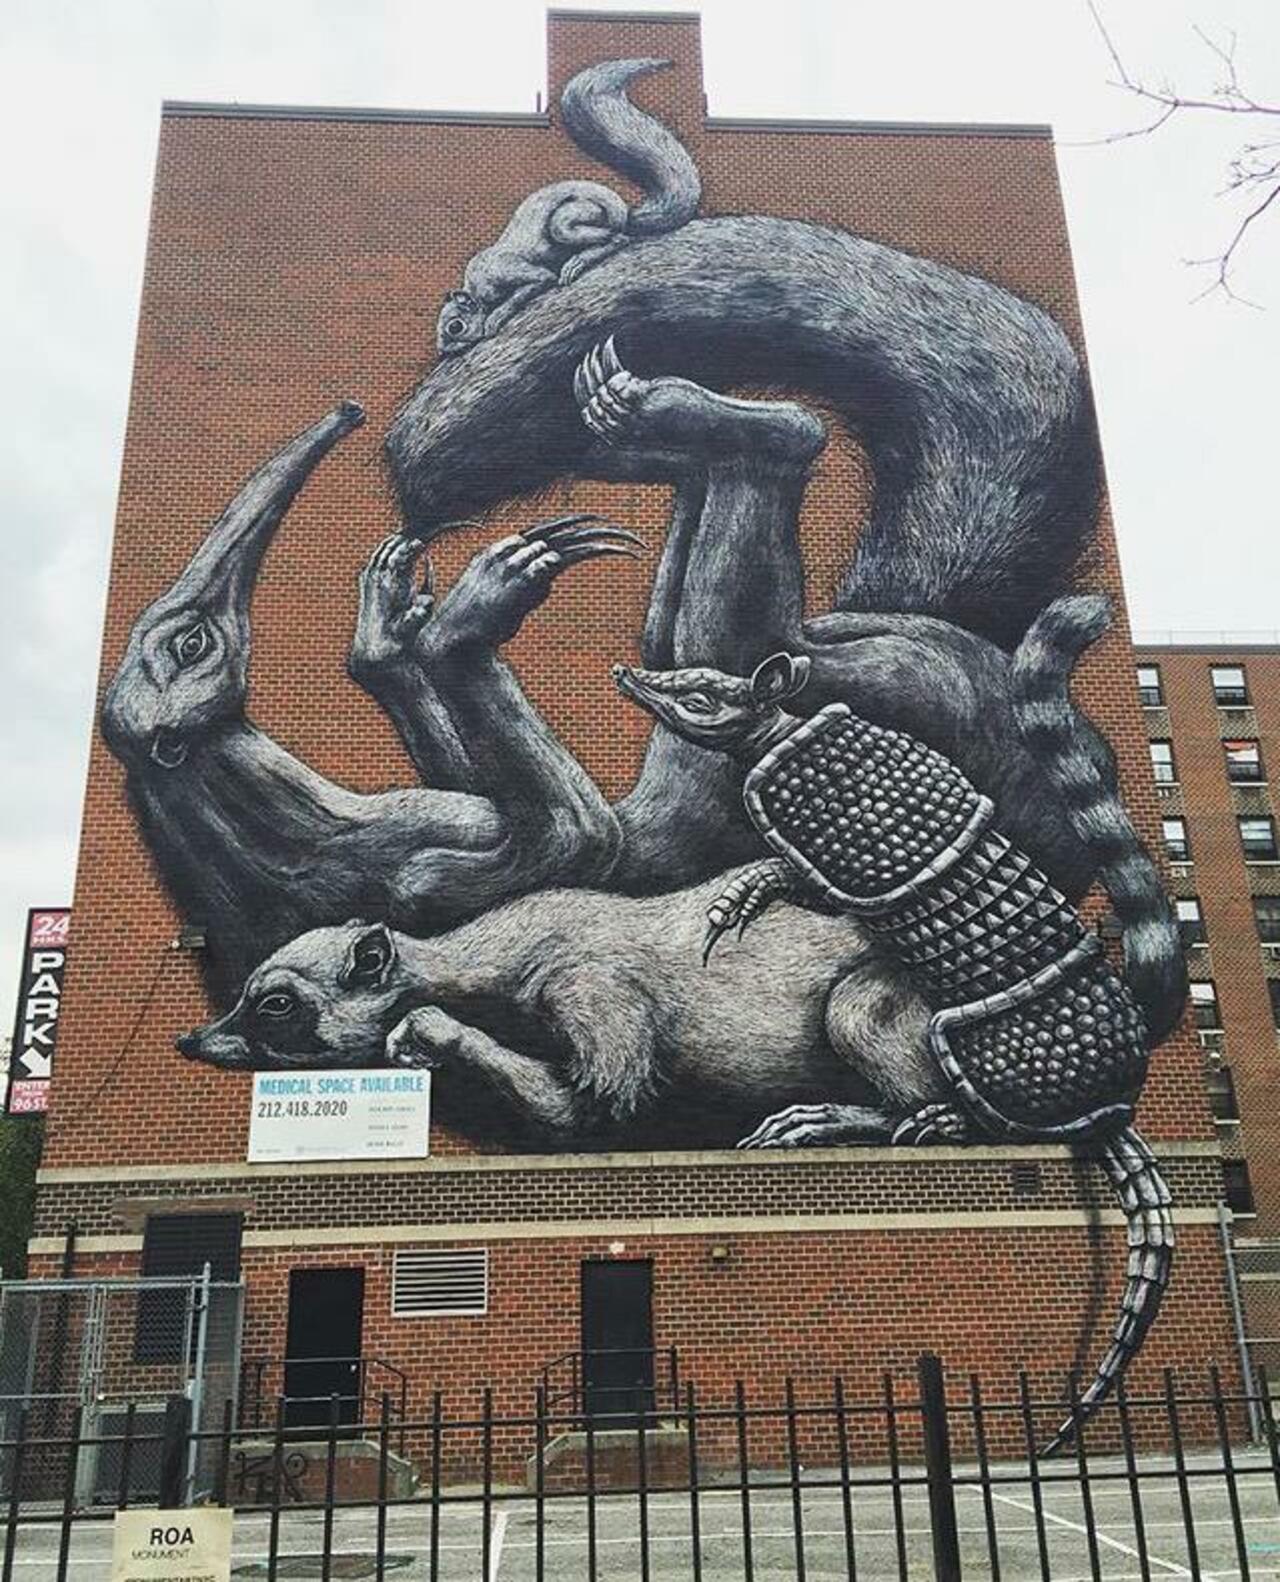 The completed new large scale Street Art wall by ROA in NYC

#art #graffiti #mural #streetart http://t.co/JoxITde2Ap